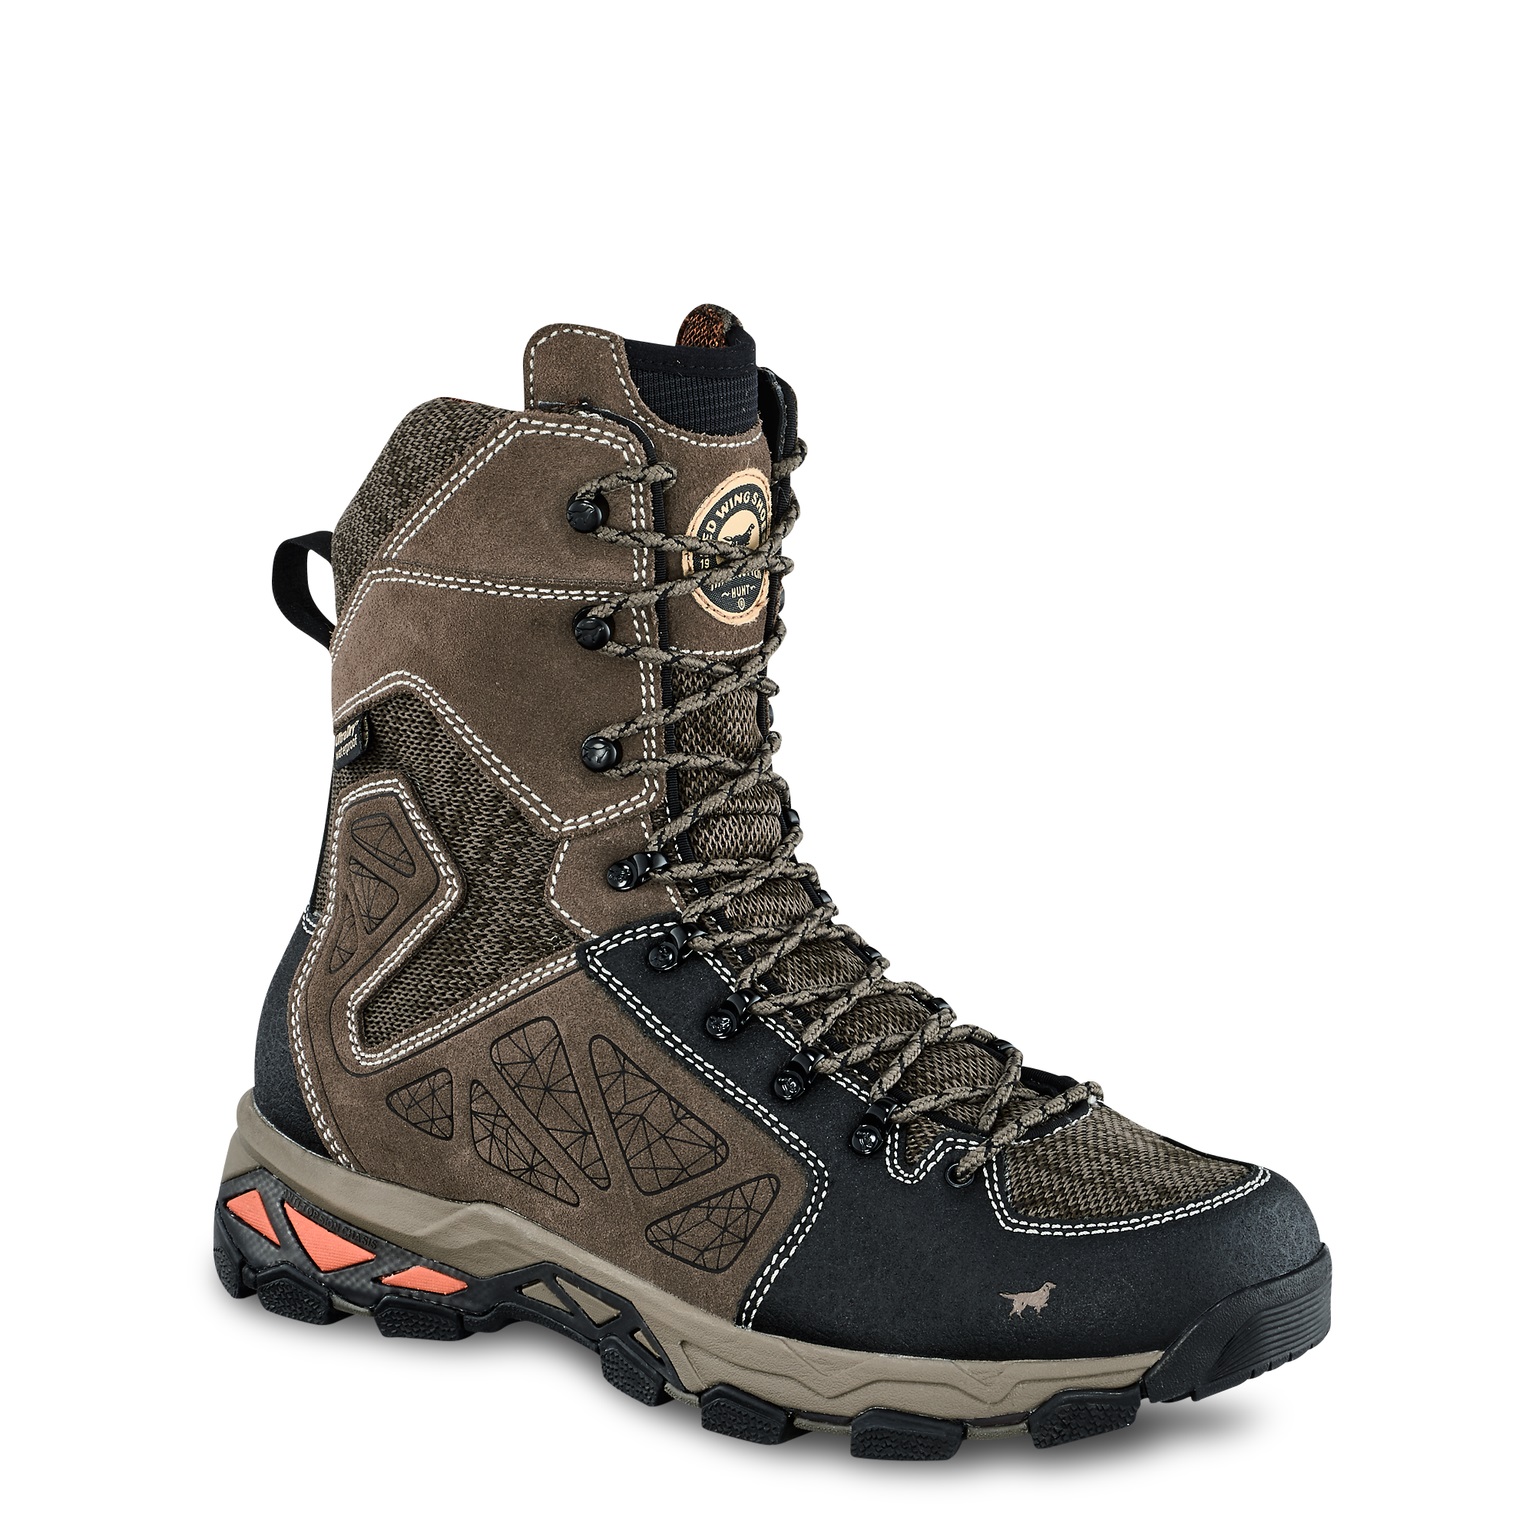 black leather hiking boots mens